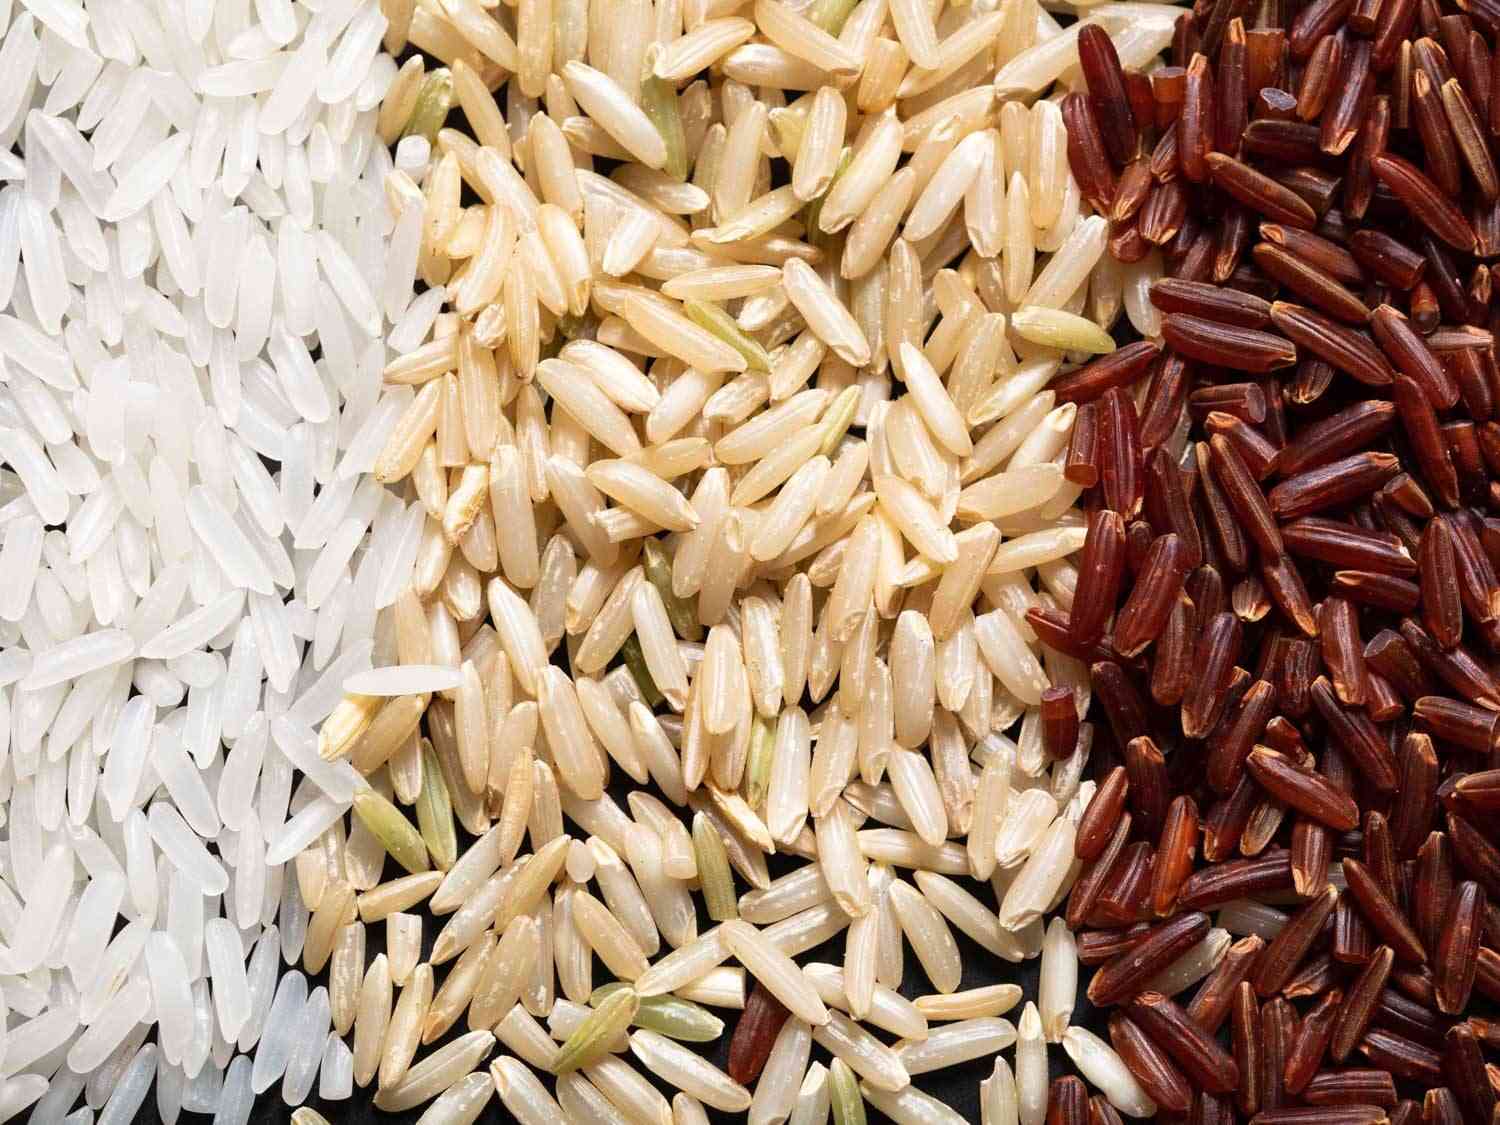 A macro comparison view of polished, brown, and red jasmine rice